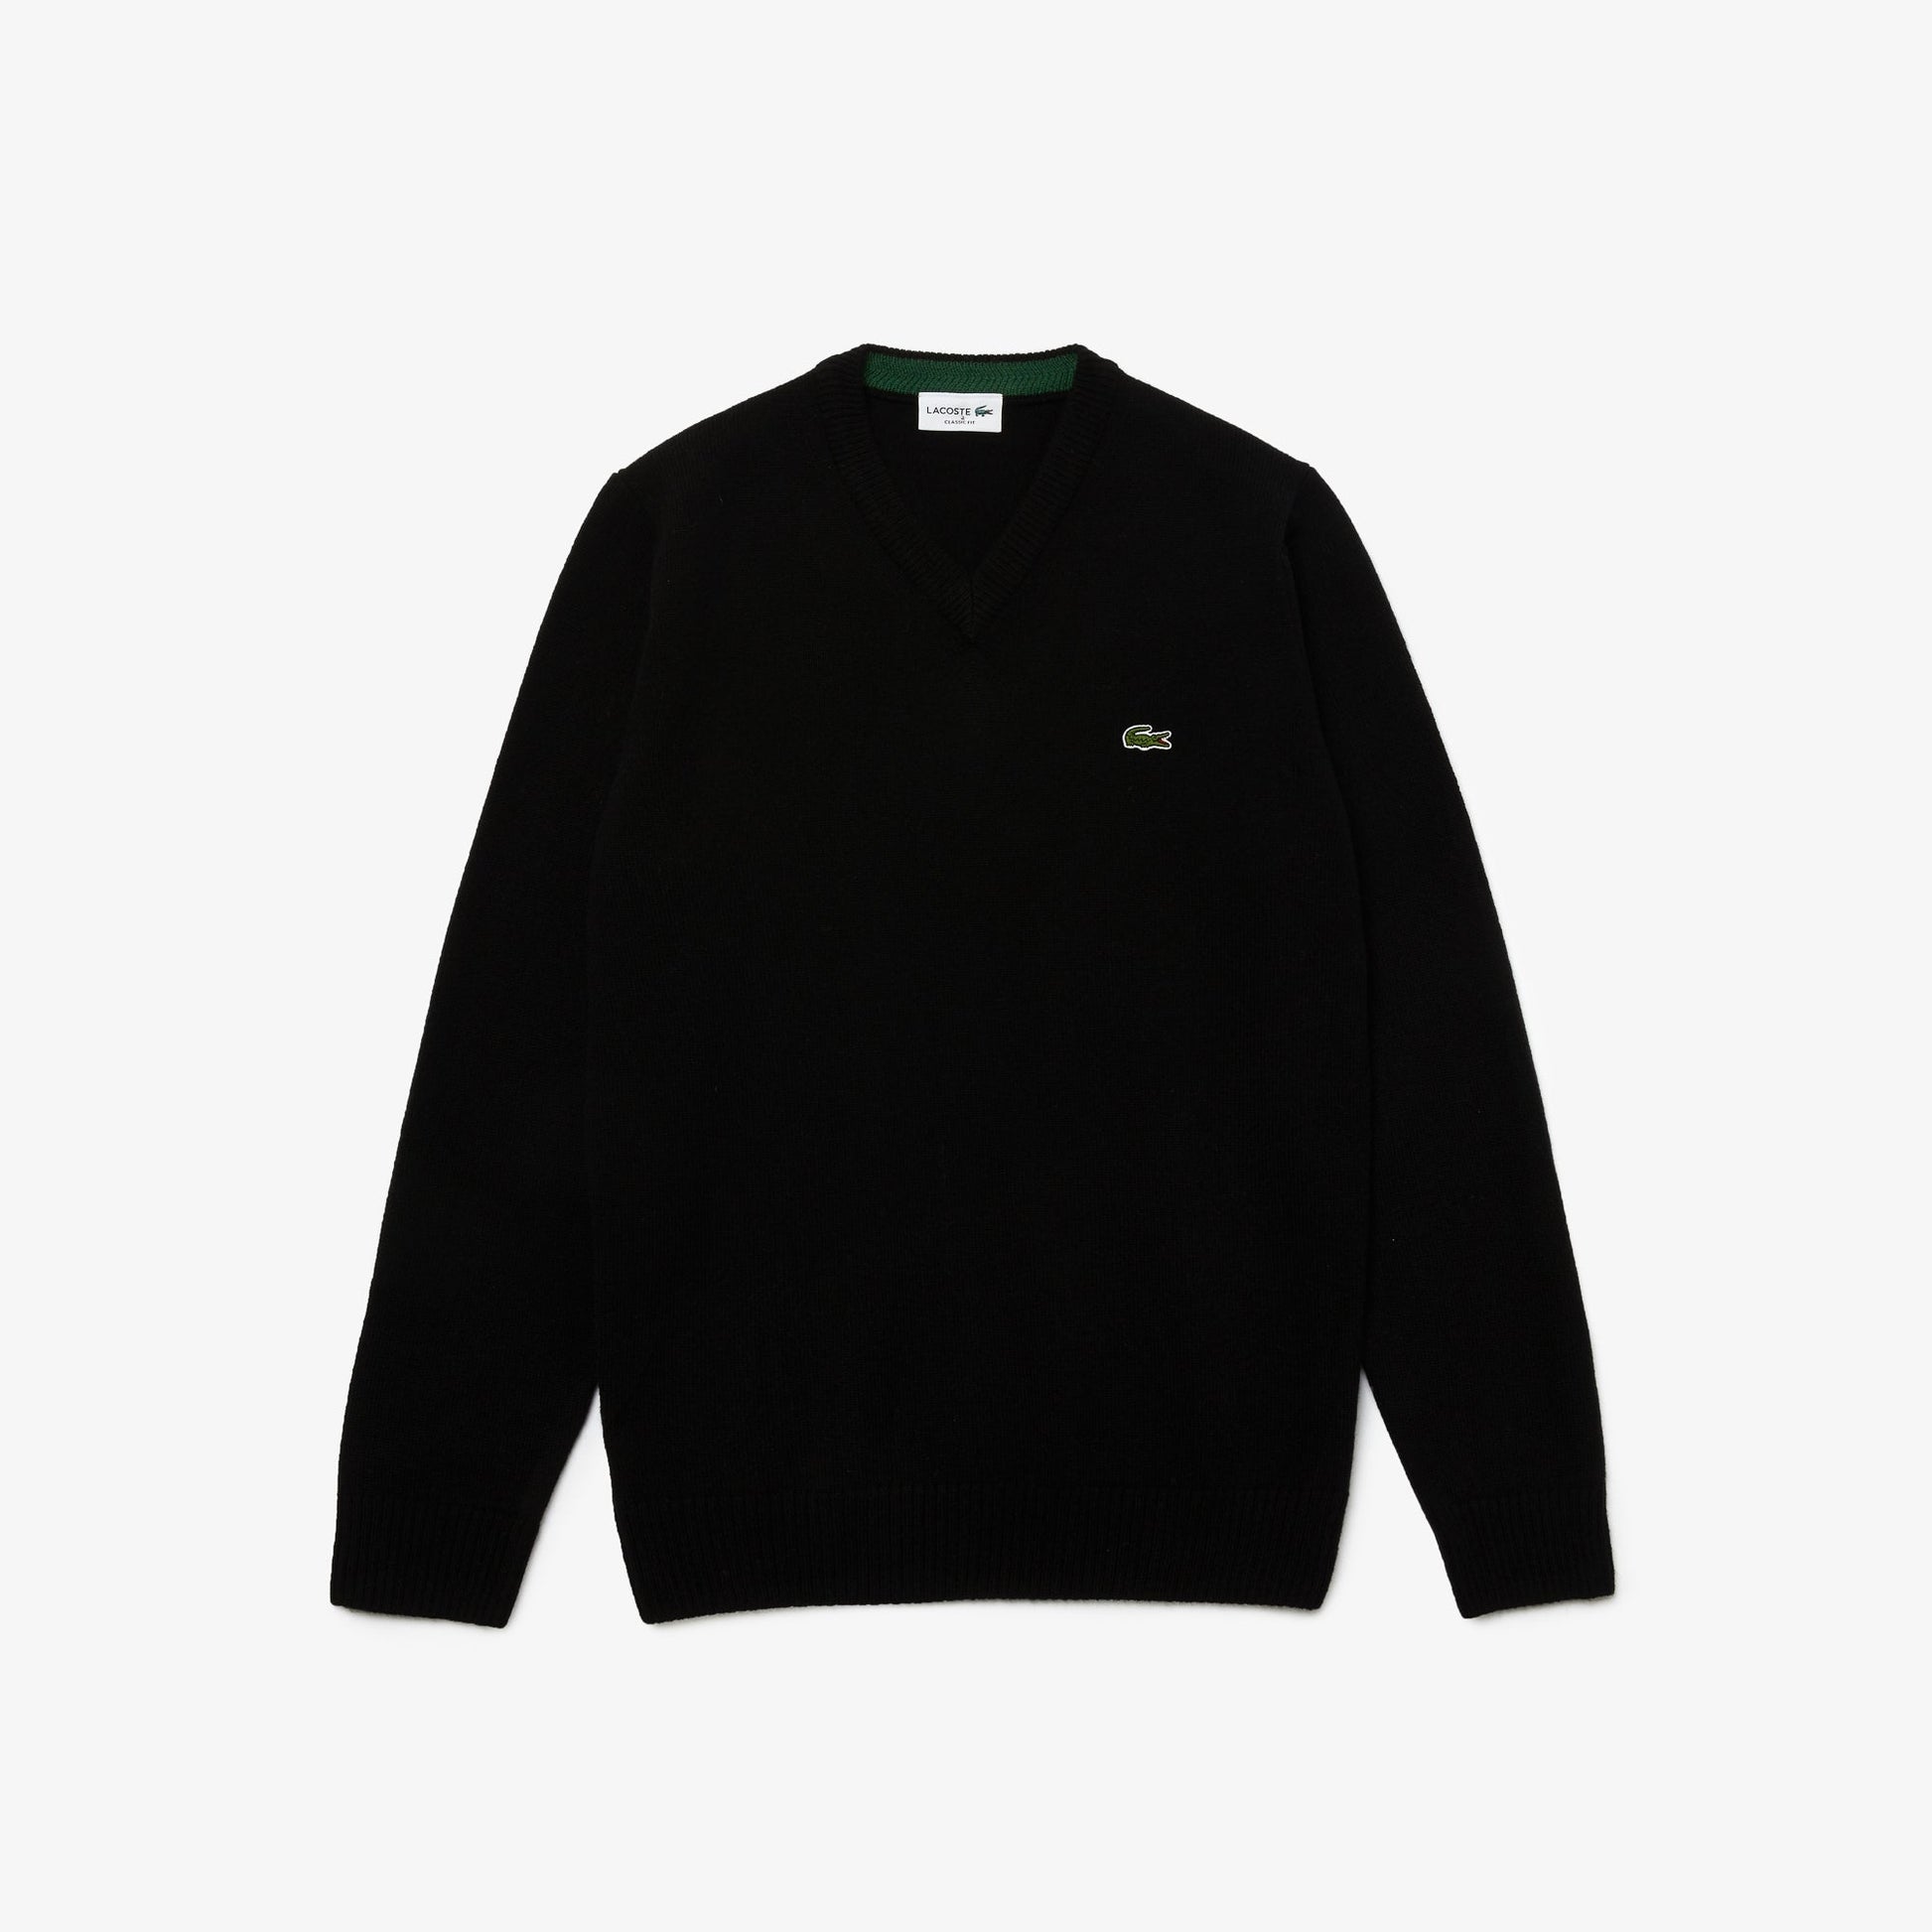 Shop The Latest Collection Of Lacoste Men'S V-Neck Wool Sweater - Ah1952 In Lebanon